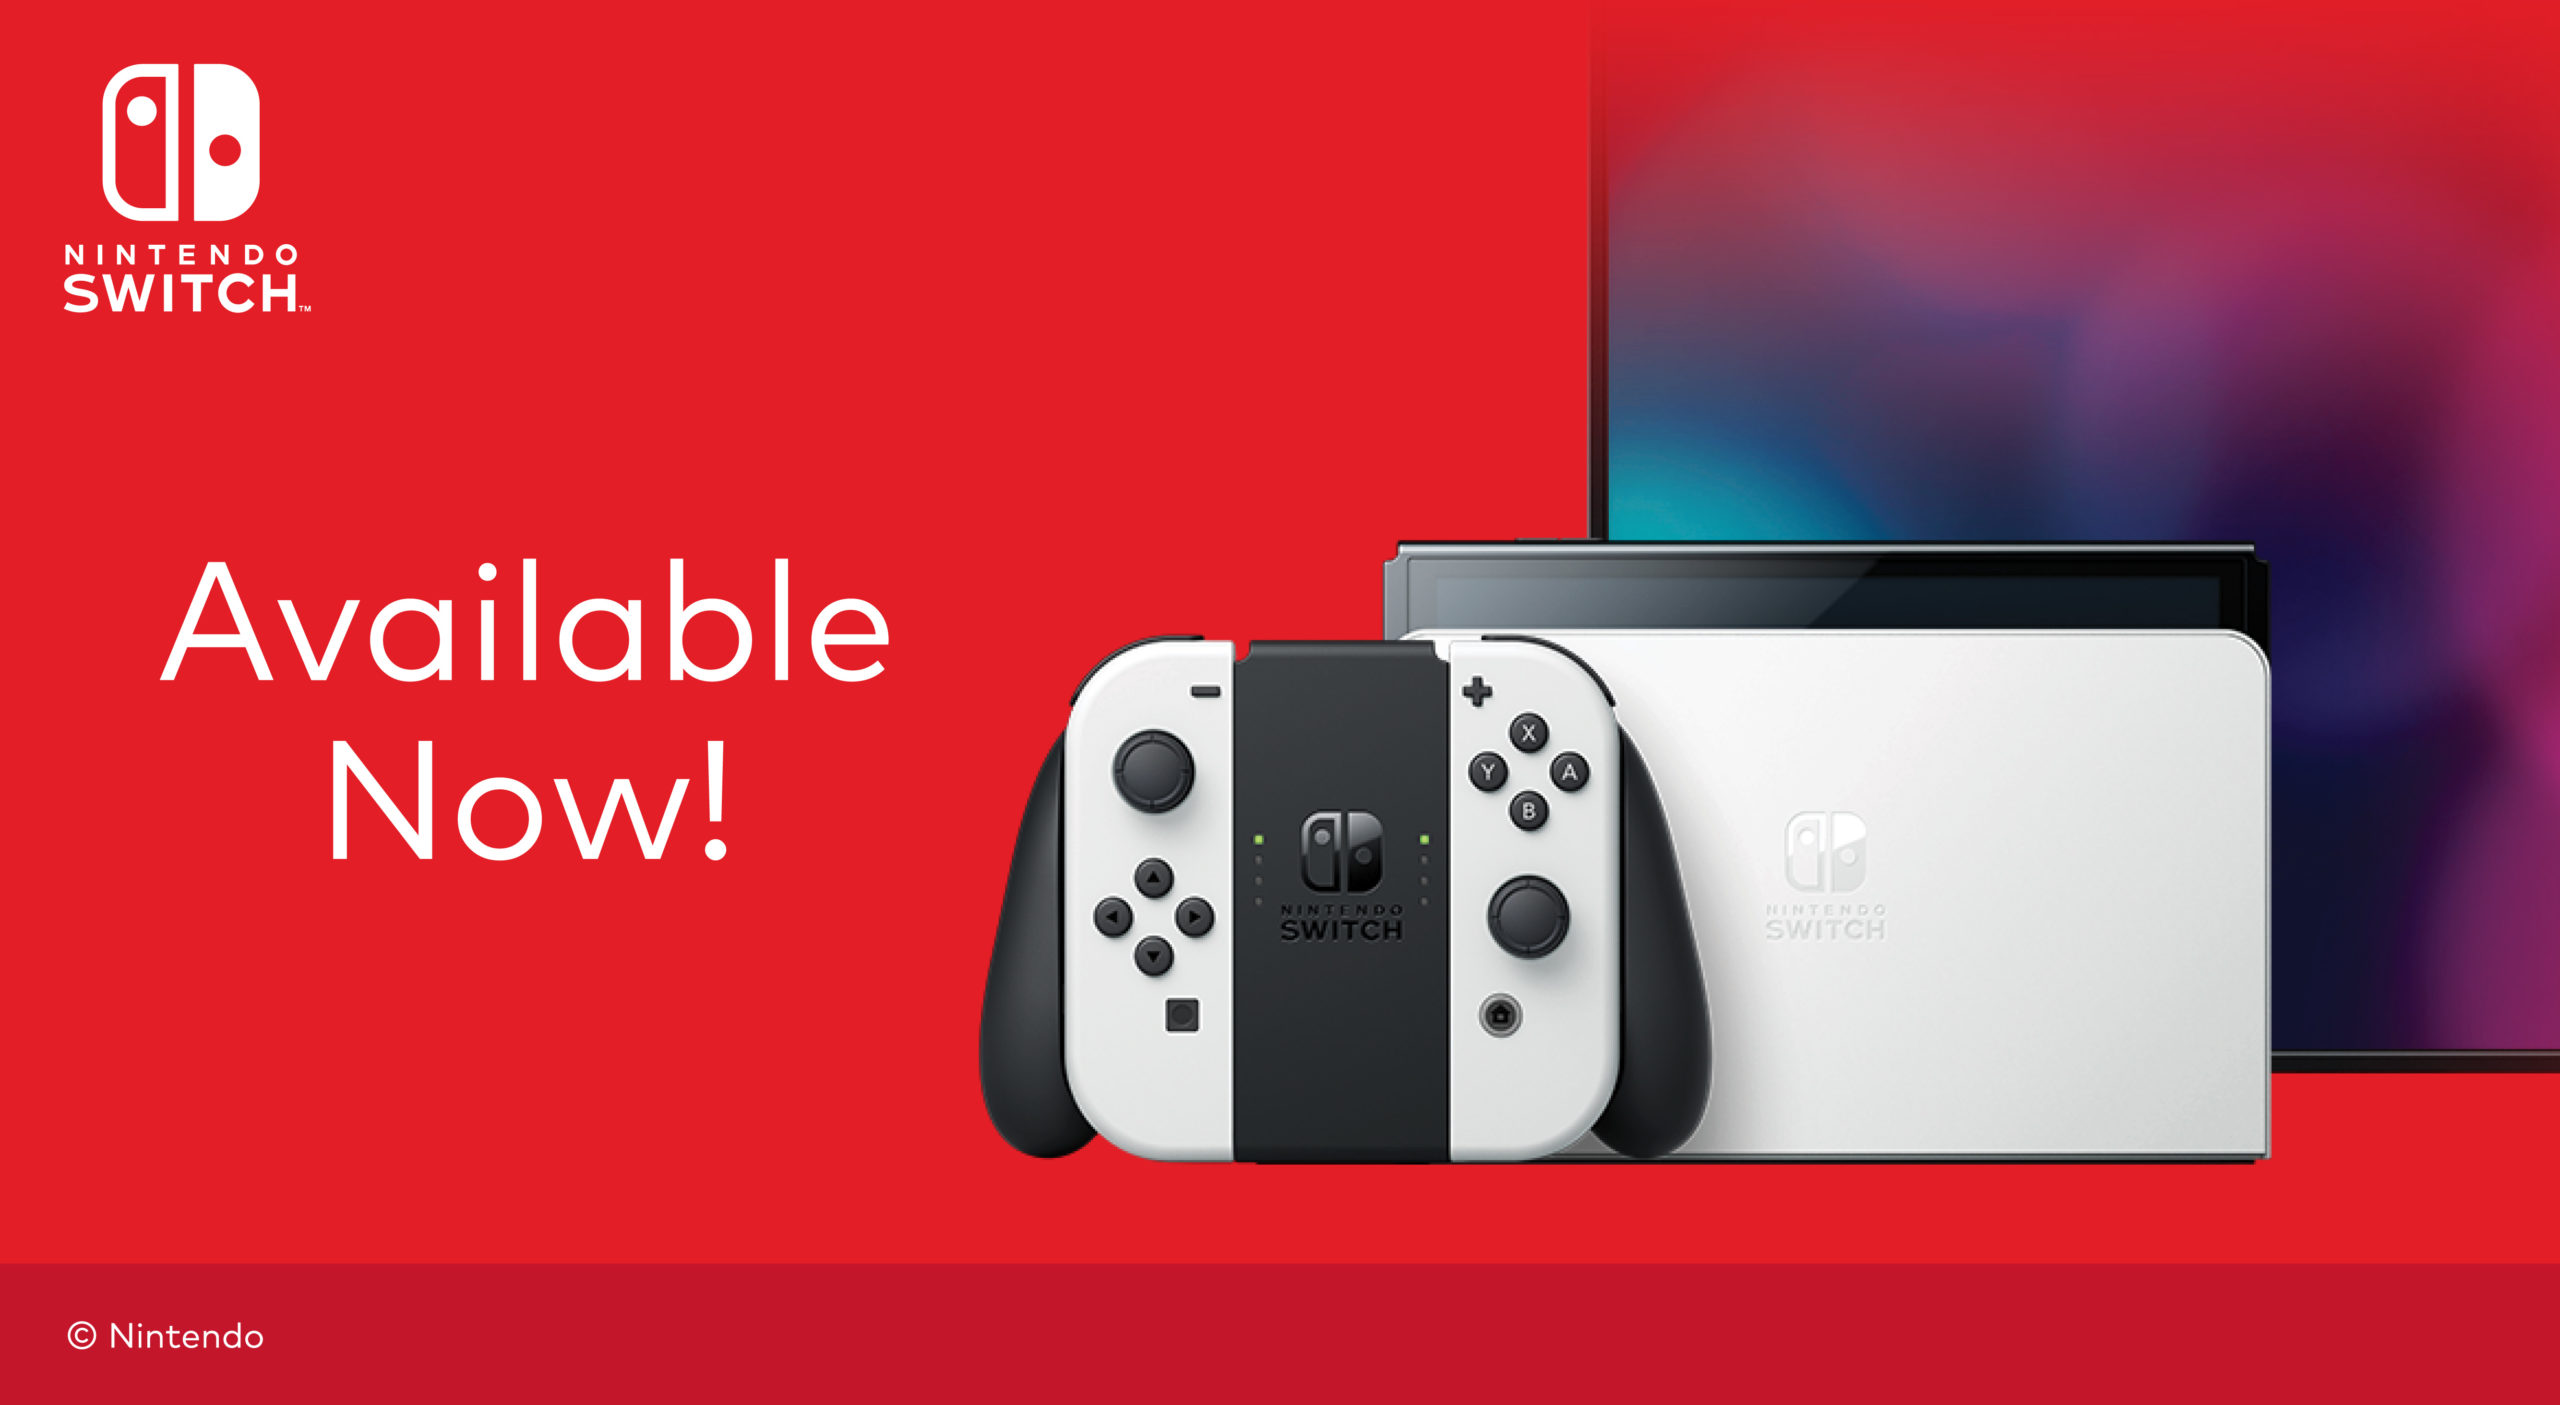 Convergent Distribution Appointed as Official Distributor of Nintendo Switch in Malaysia